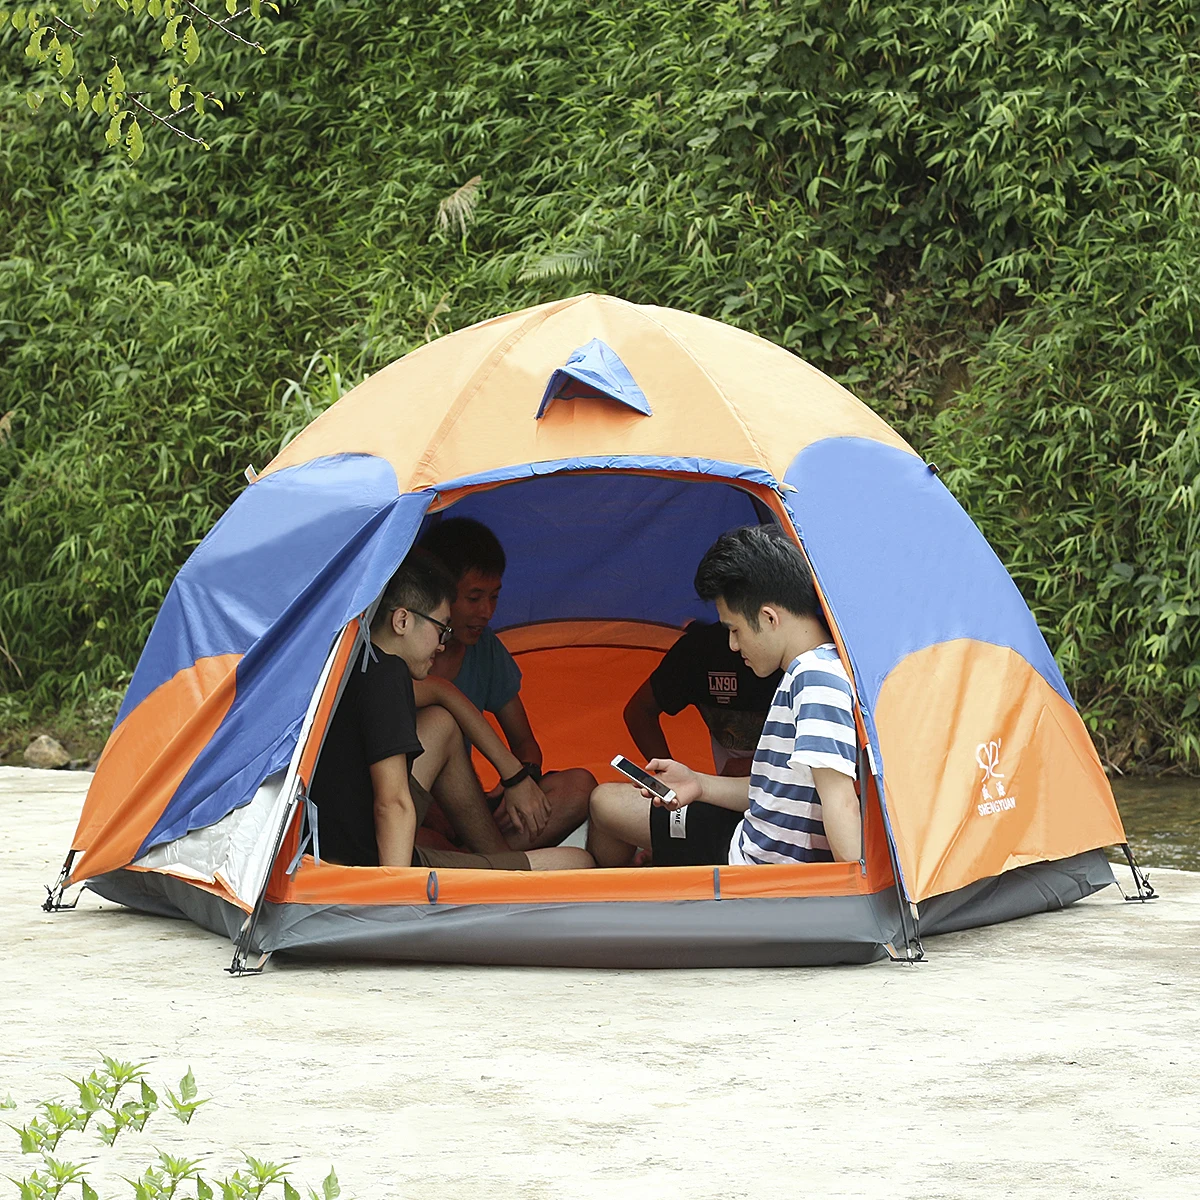 

Outdoor 5-8 Persons Big Large Tent Sunshade Double Layer Sun Shelter Rainproof Anti-UV Shed Camping Hiking Travel Tent